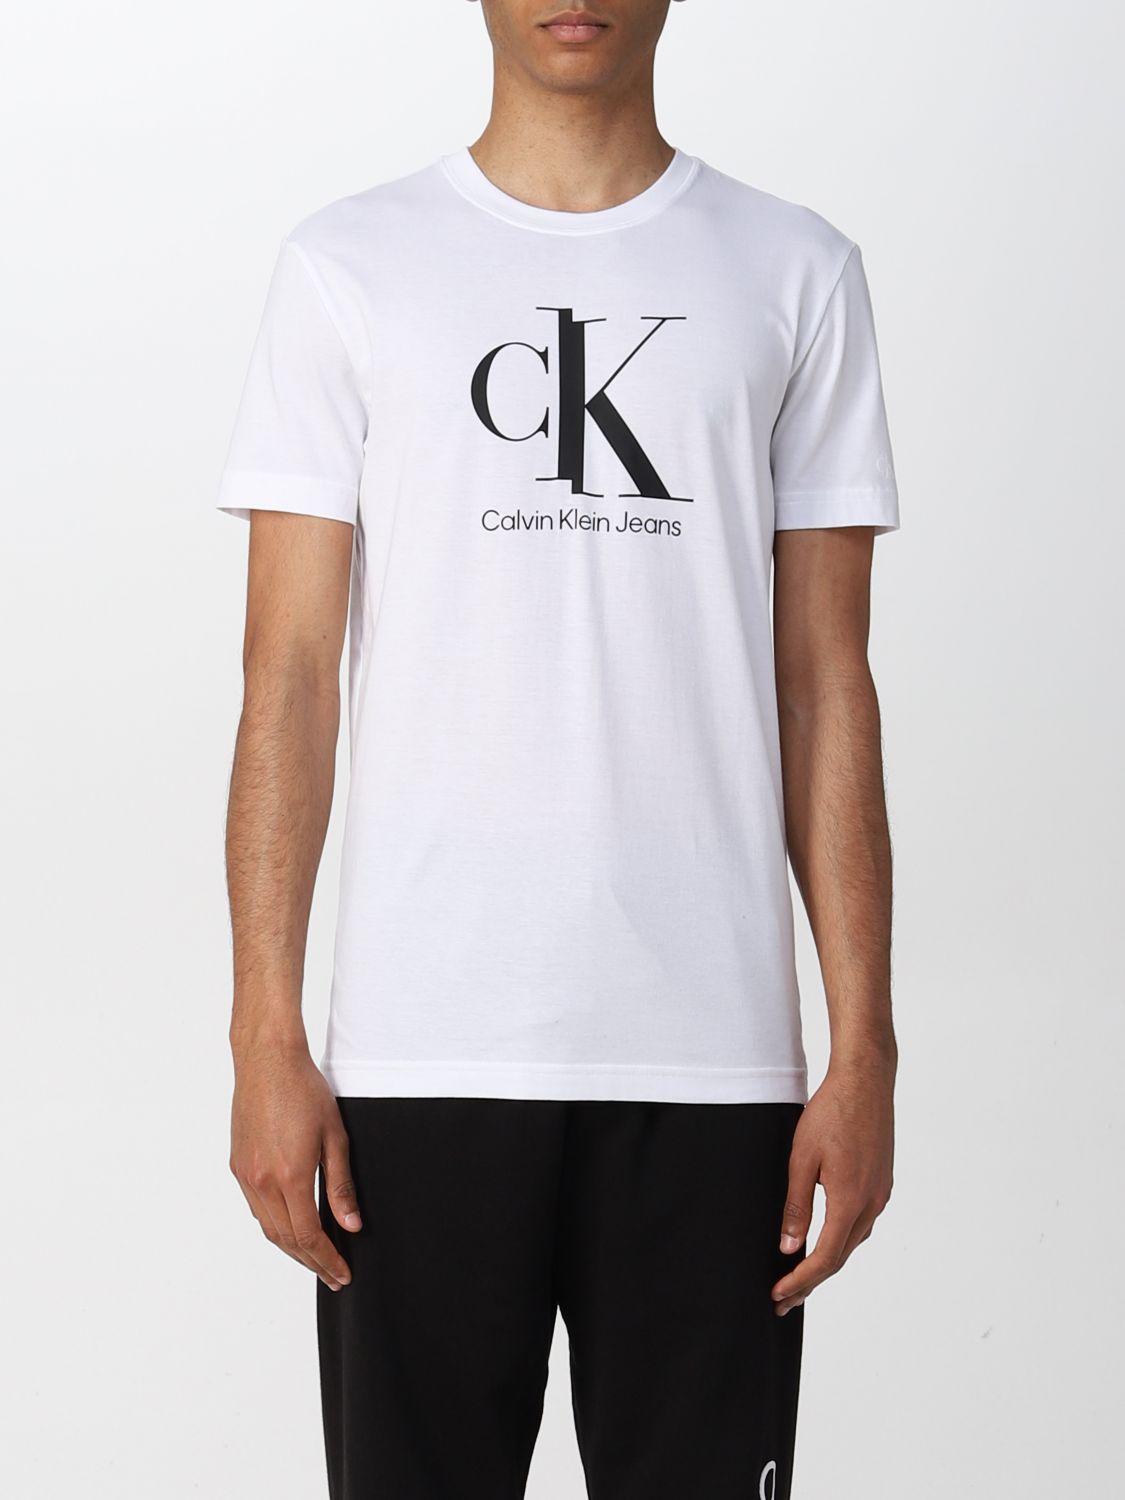 CALVIN KLEIN JEANS - Men's relaxed T-shirt with monogram and logo - White -  J30J323995YAF